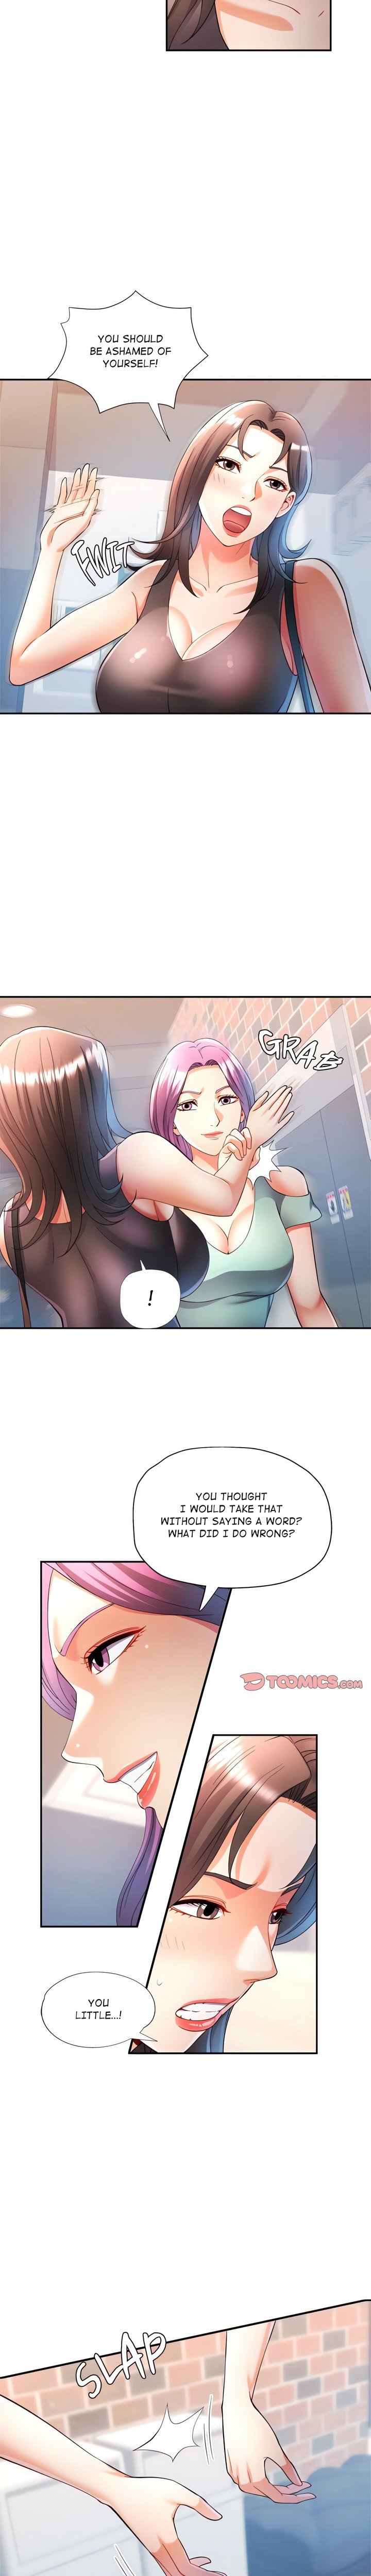 in-her-place-chap-26-8